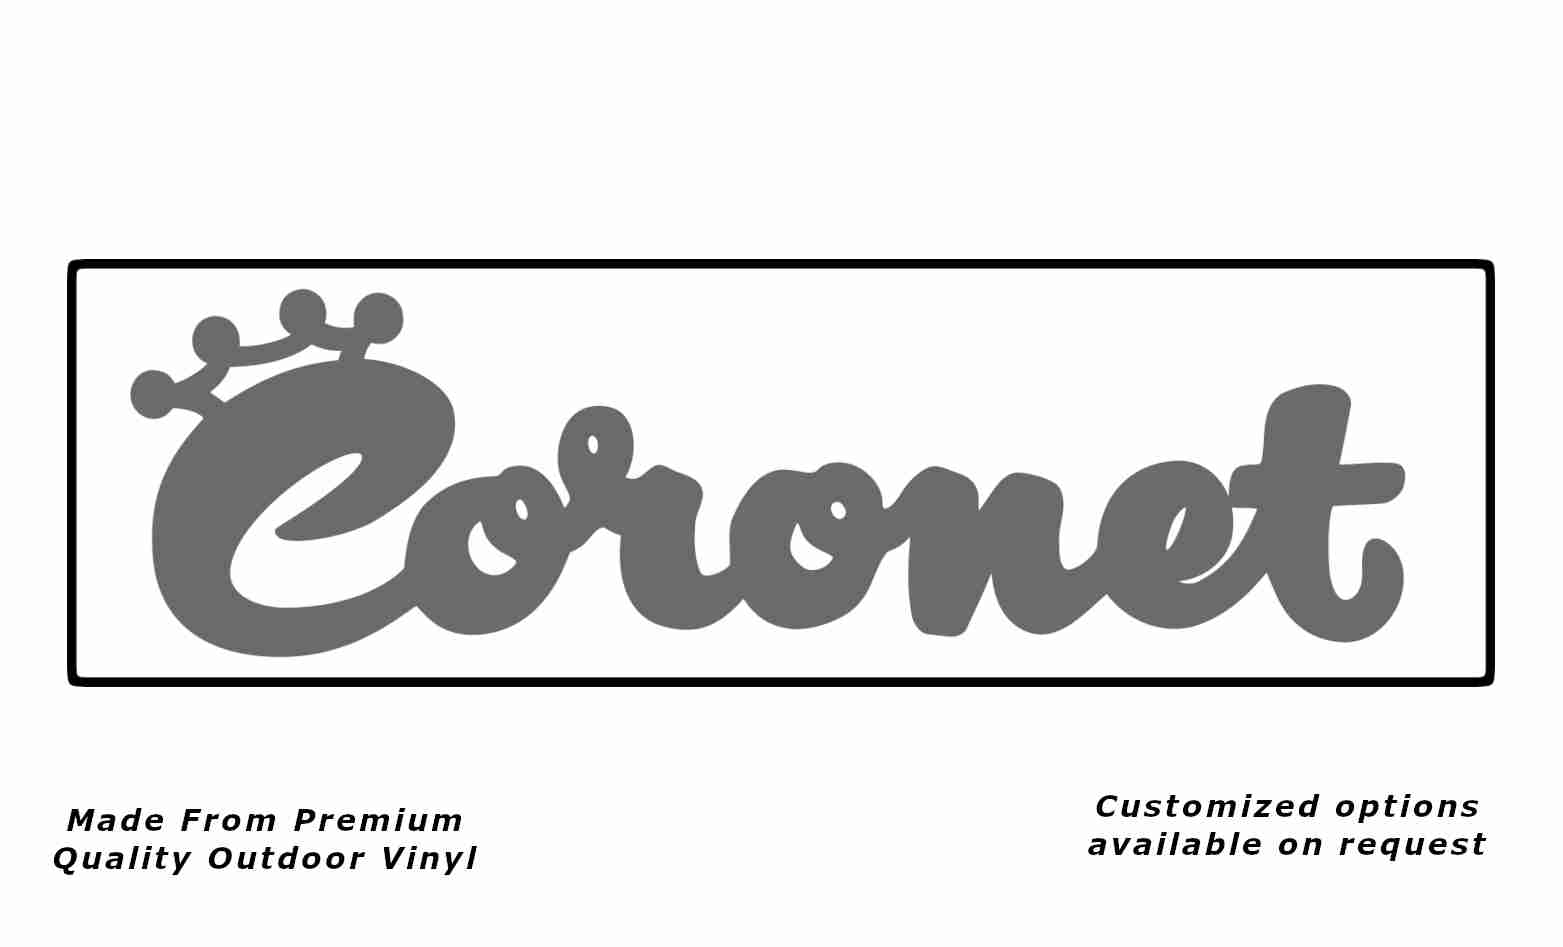 Coronet with border caravan replacement vinyl decal sticker in silver grey and black.